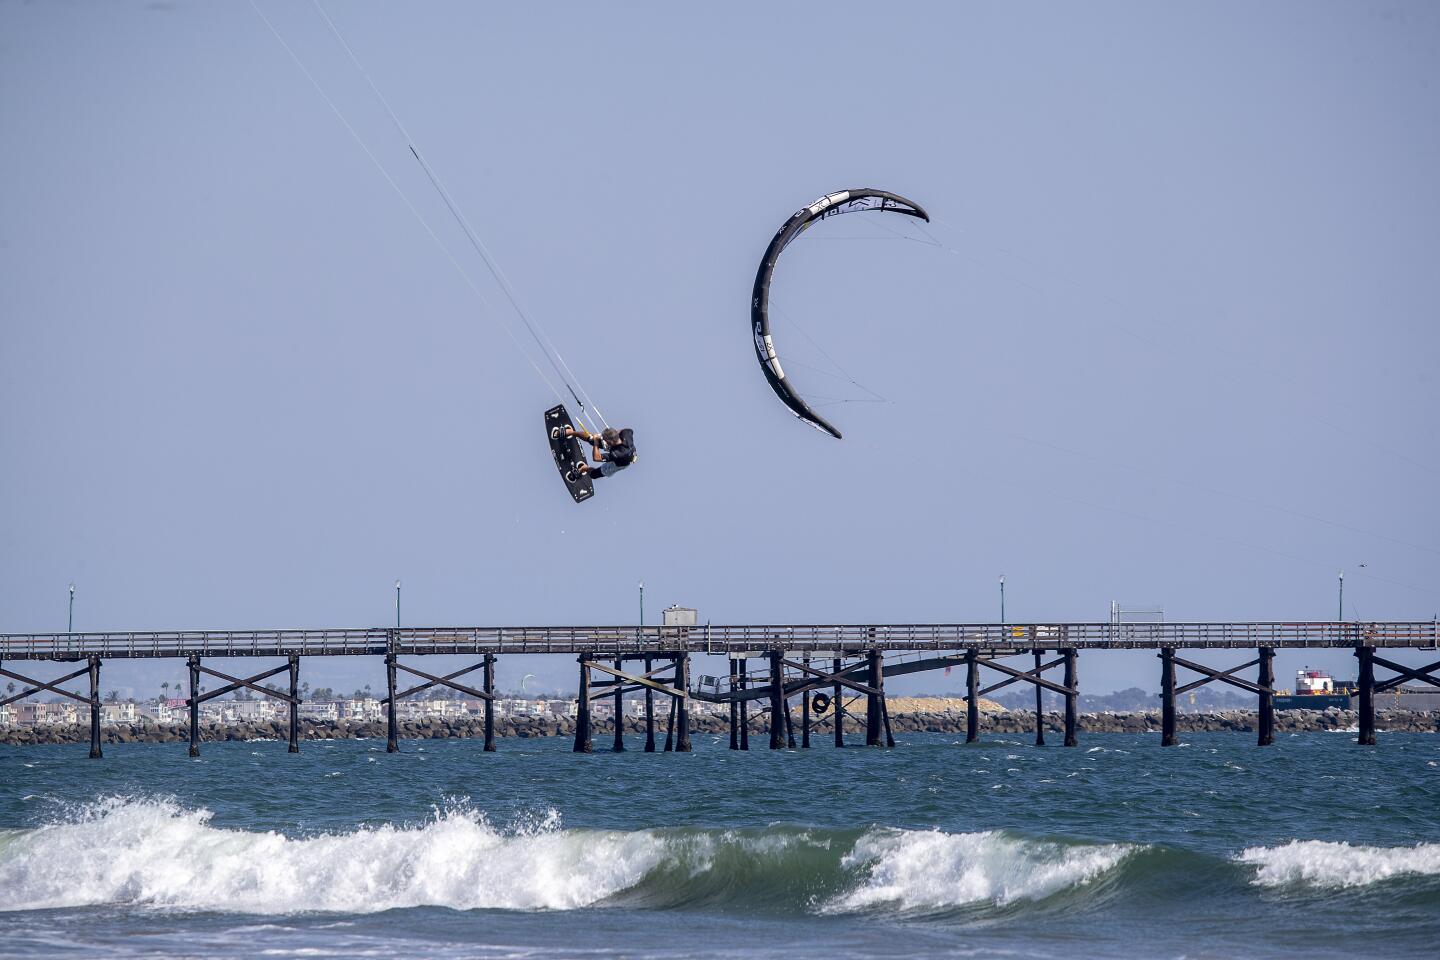 A kite surfer goes airborne in Seal Beach